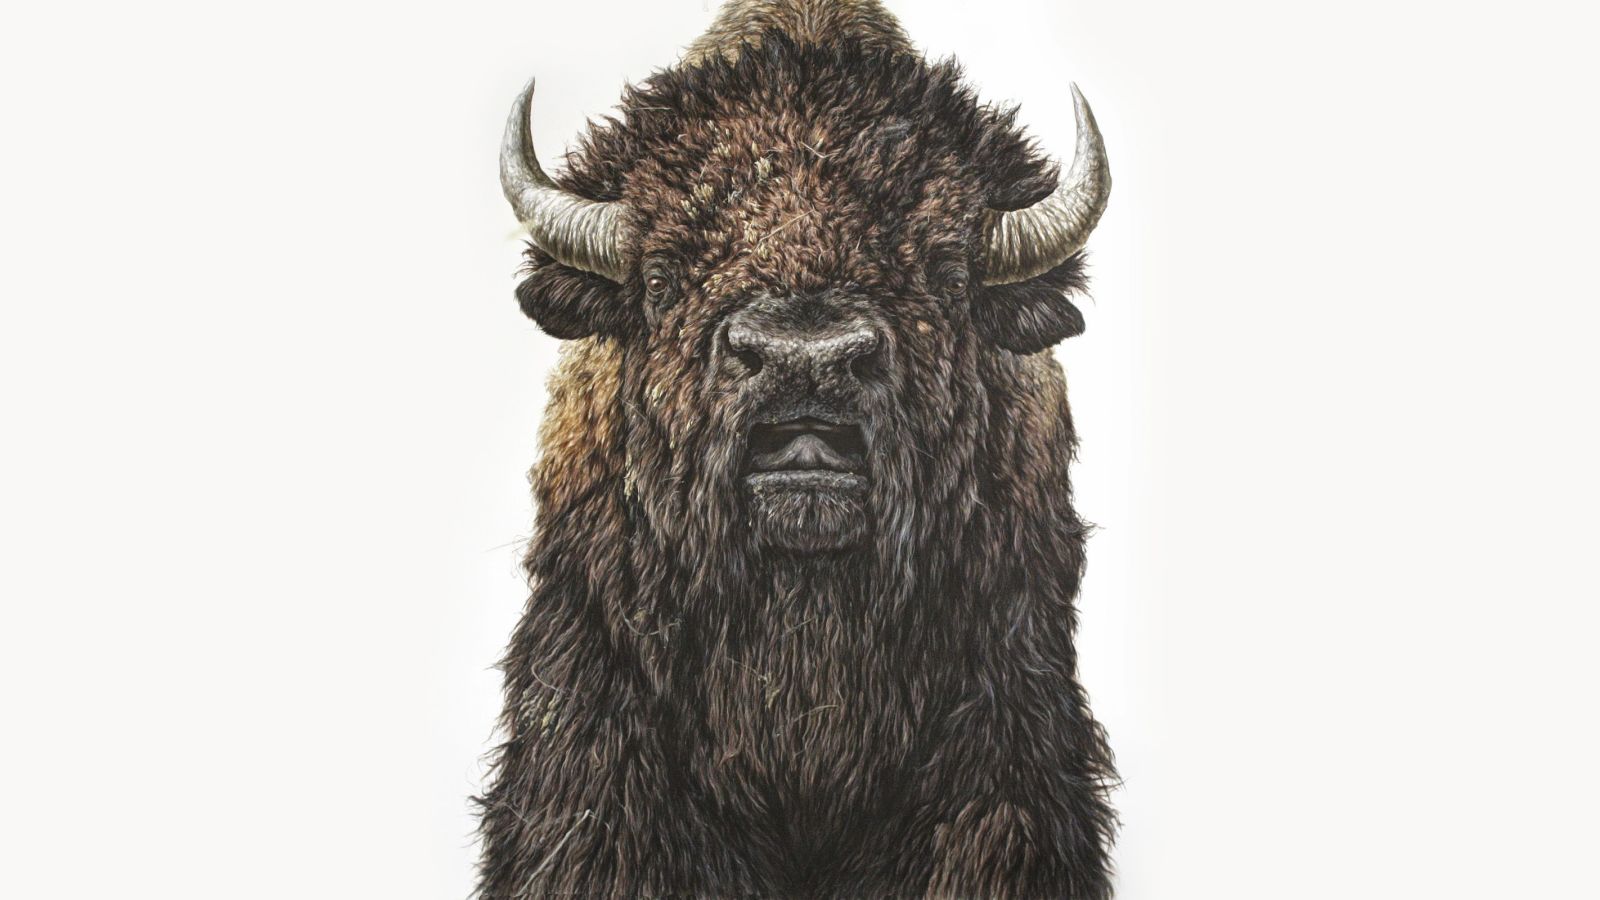 Illustration for article titled My Dad Bought A Buffalo. What Would You Buy Instead?